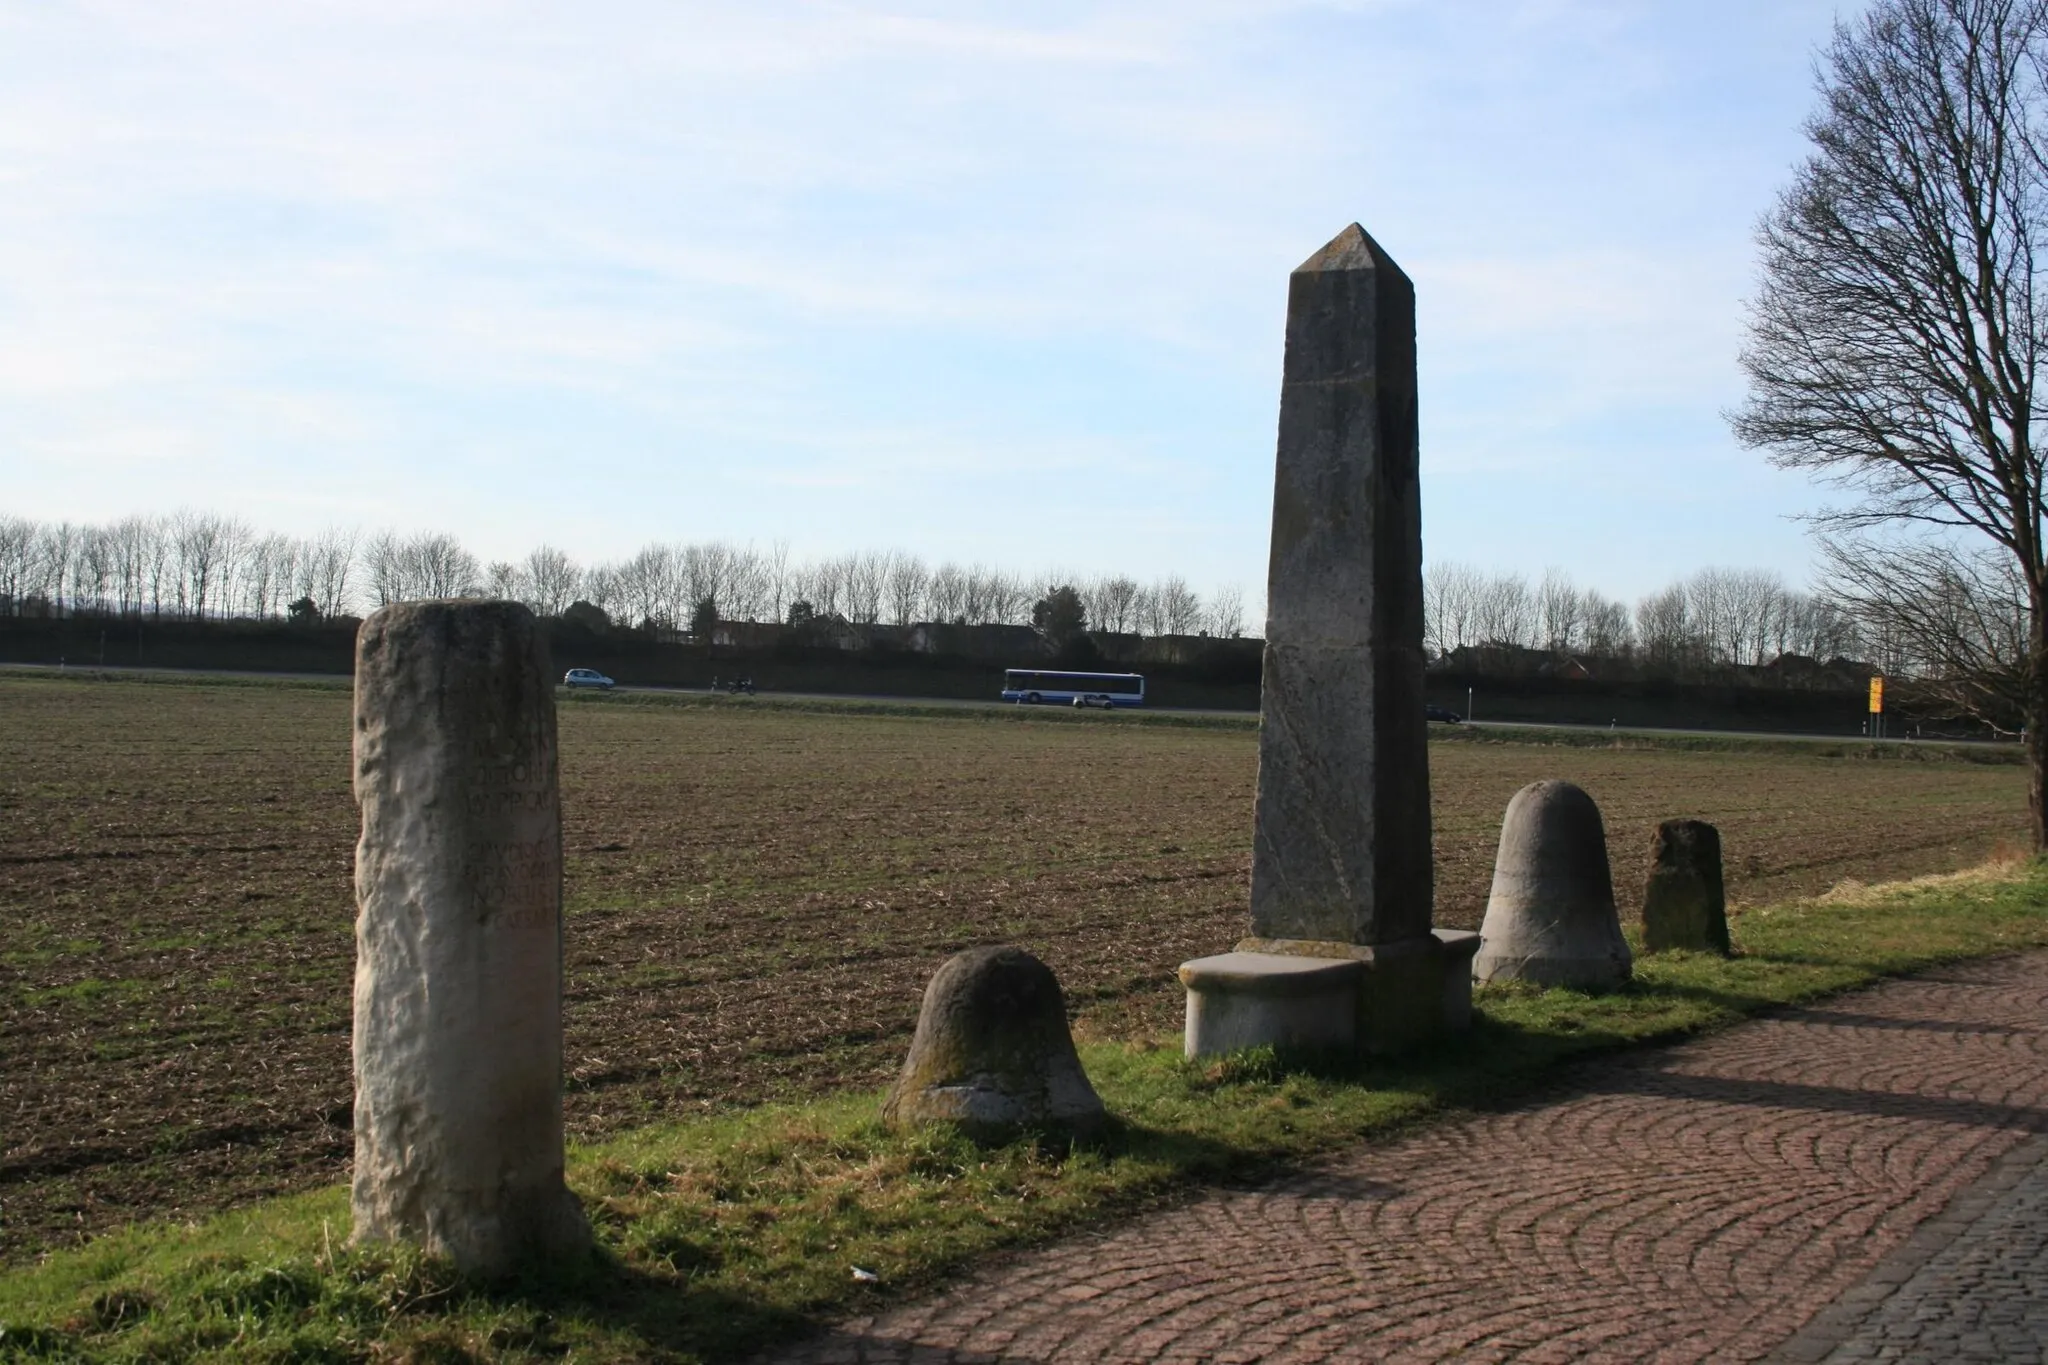 Photo showing: Cultural heritage monument No. 50 in Jülich